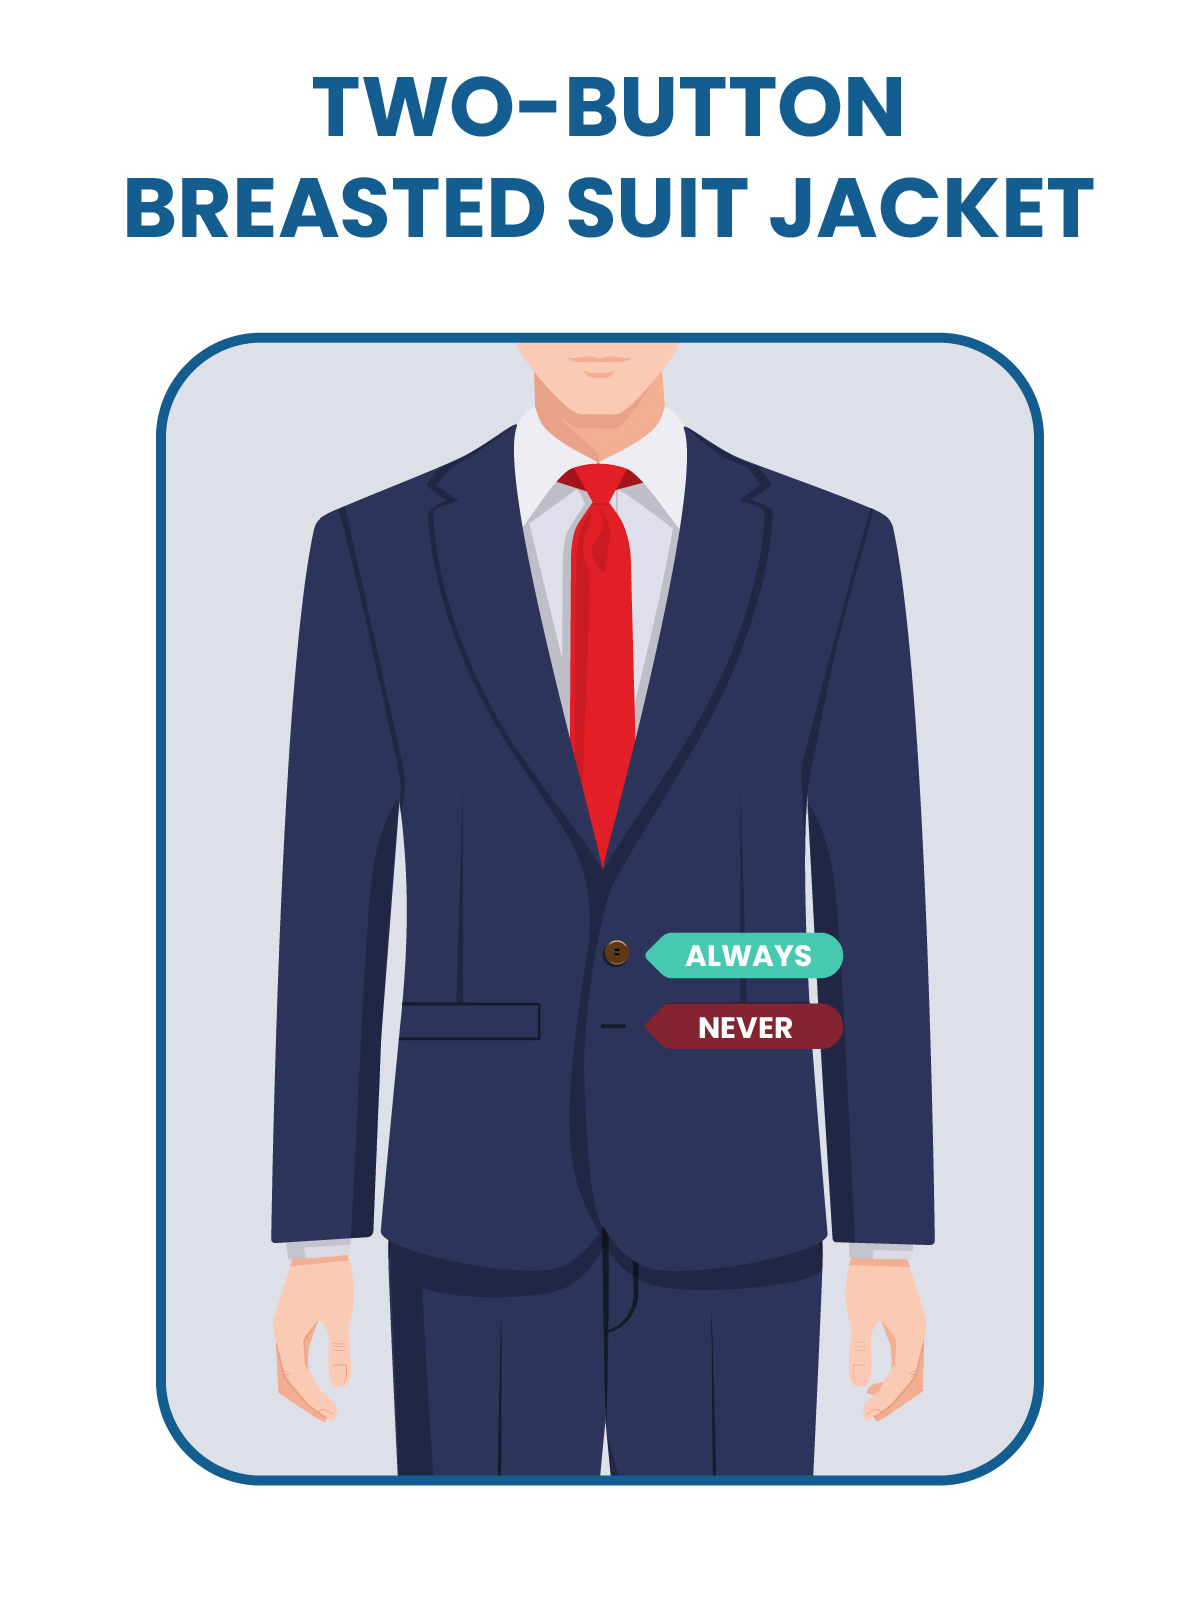 two-button single-breasted suit jacket buttoning rule